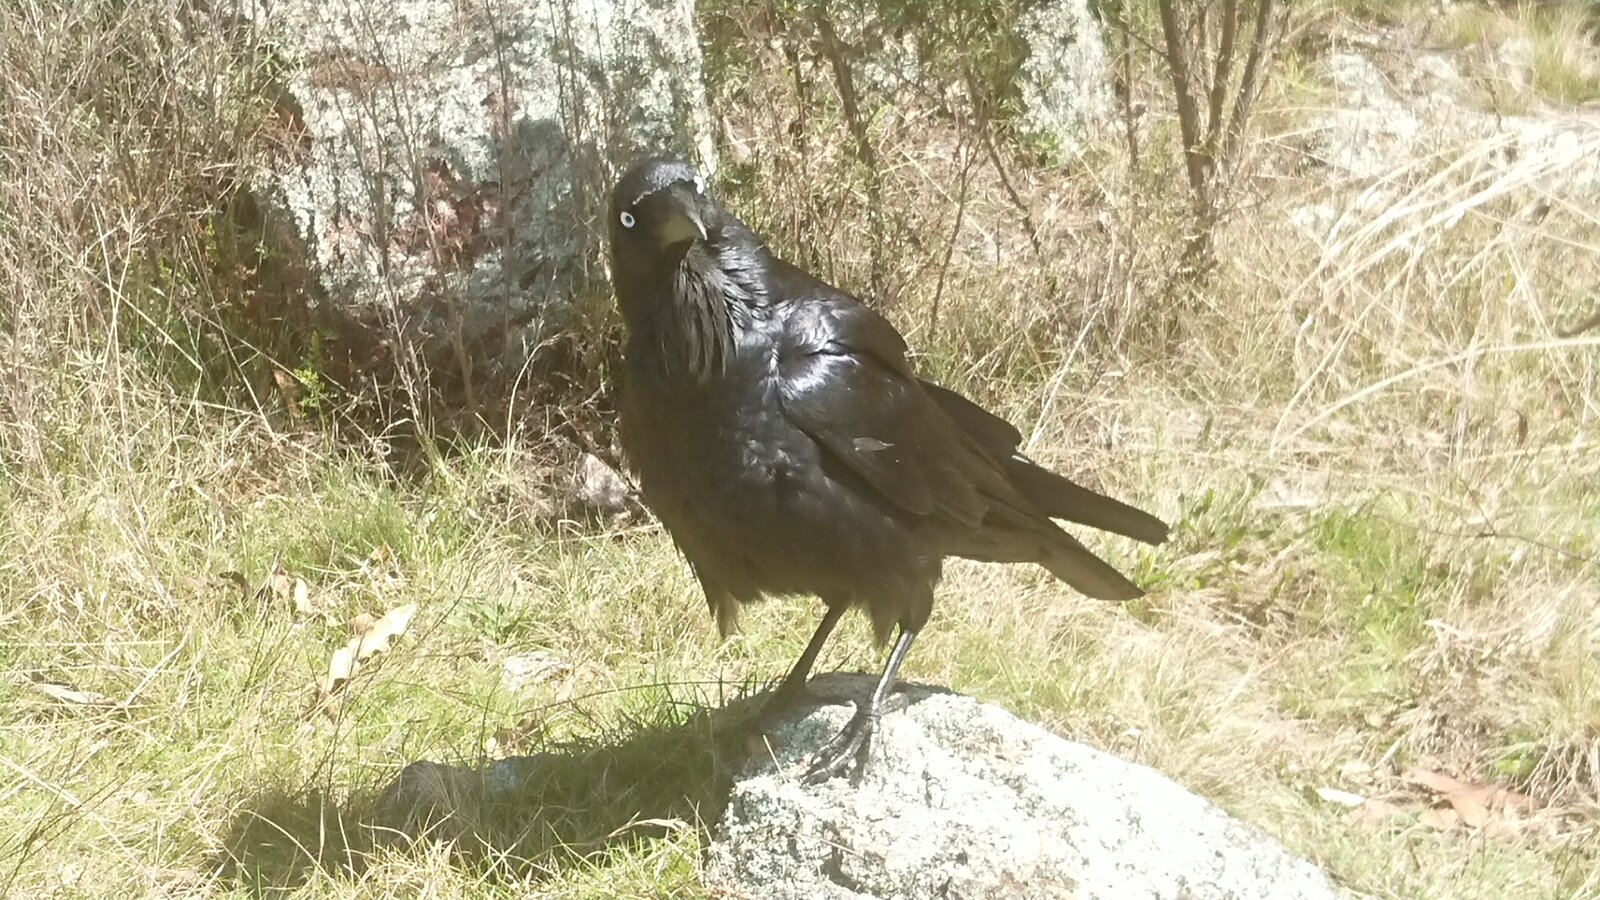 Our Visitor, an Australian Raven